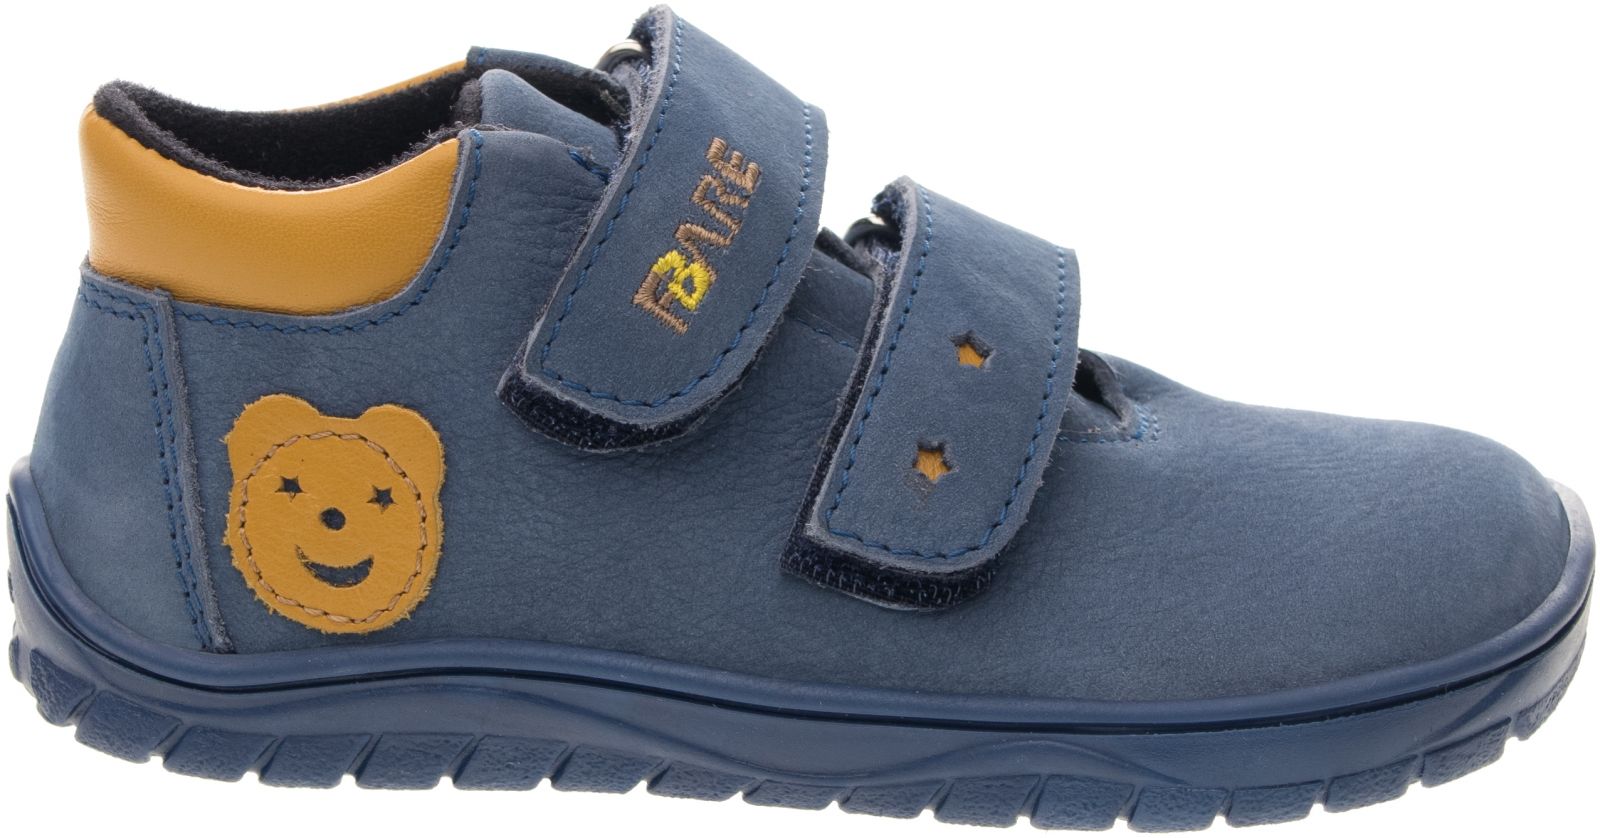 Barefoot Fare bare children's year-round shoes with membrane B5426201